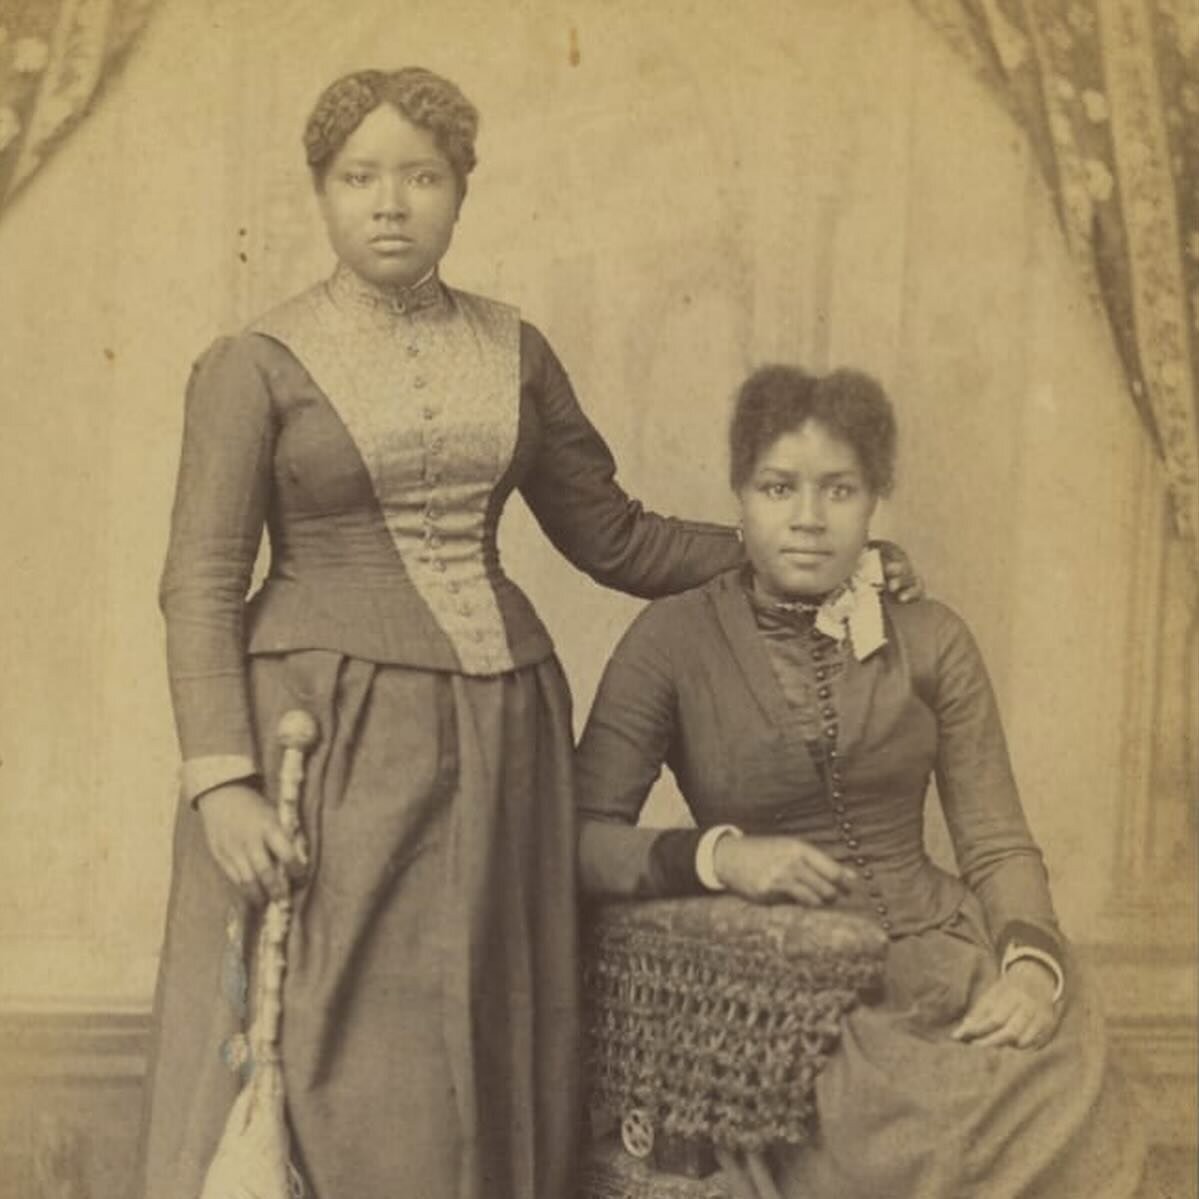 c 1885, studio portrait of two young women, one seated, one standing while embracing the other and holding a parasol, taken in Seguin, Texas &mdash;The Henry Ford Collection